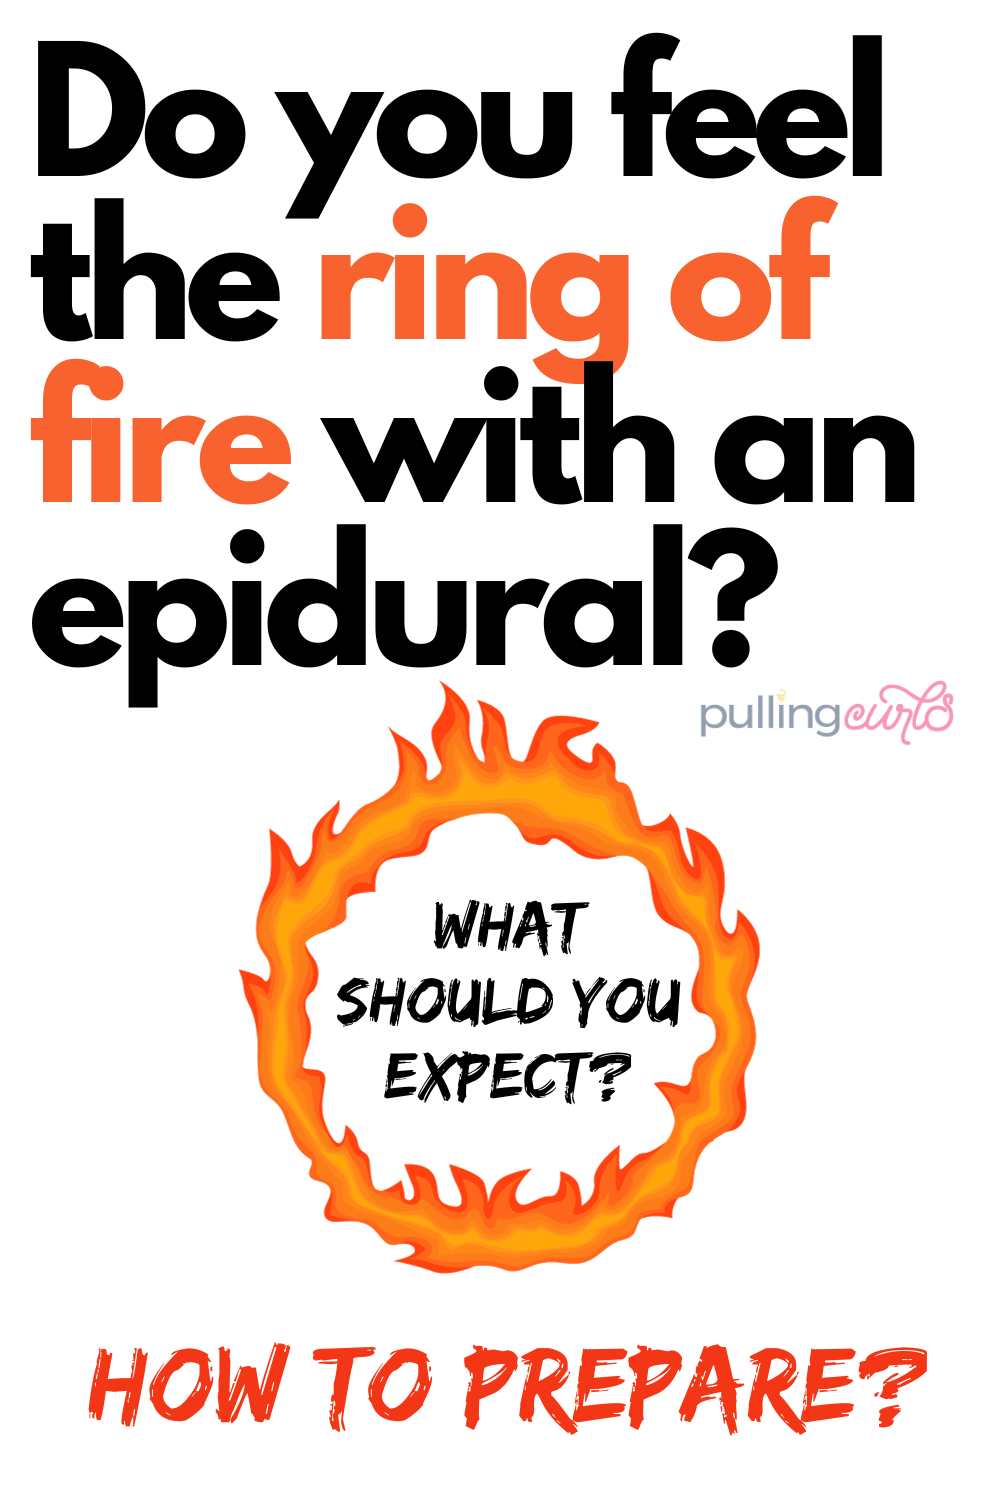 Do you feel the ring of fire with an epidural